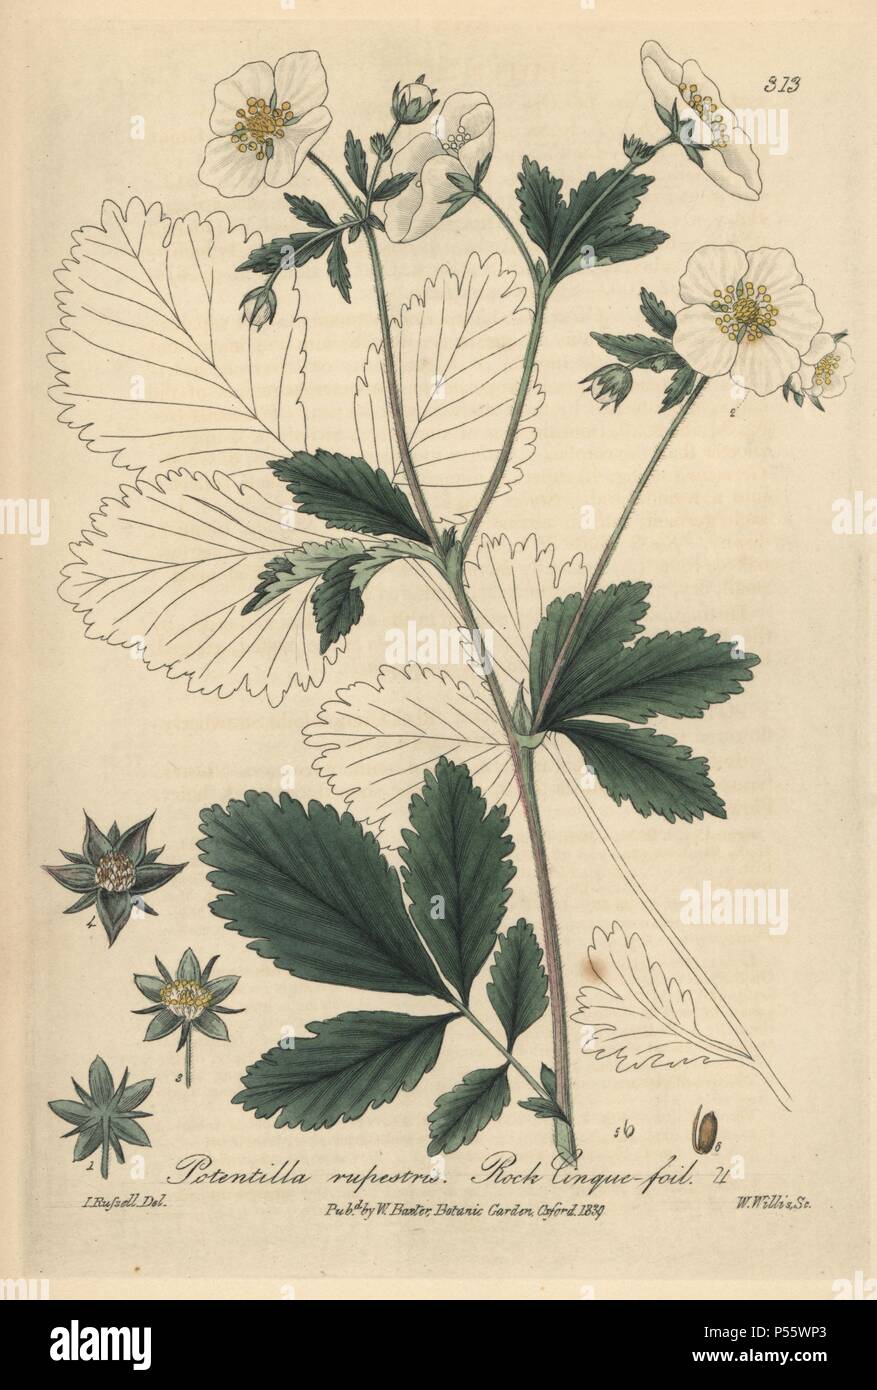 Rock cinquefoil, Potentilla rupestris. Handcoloured copperplate engraved by W. Willis and drawn by Isaac Russell from William Baxter's 'British Phaenogamous Botany,' Oxford, 1839. Scotsman William Baxter (1788-1871) was the curator of the Oxford Botanic Garden from 1813 to 1854. Stock Photo